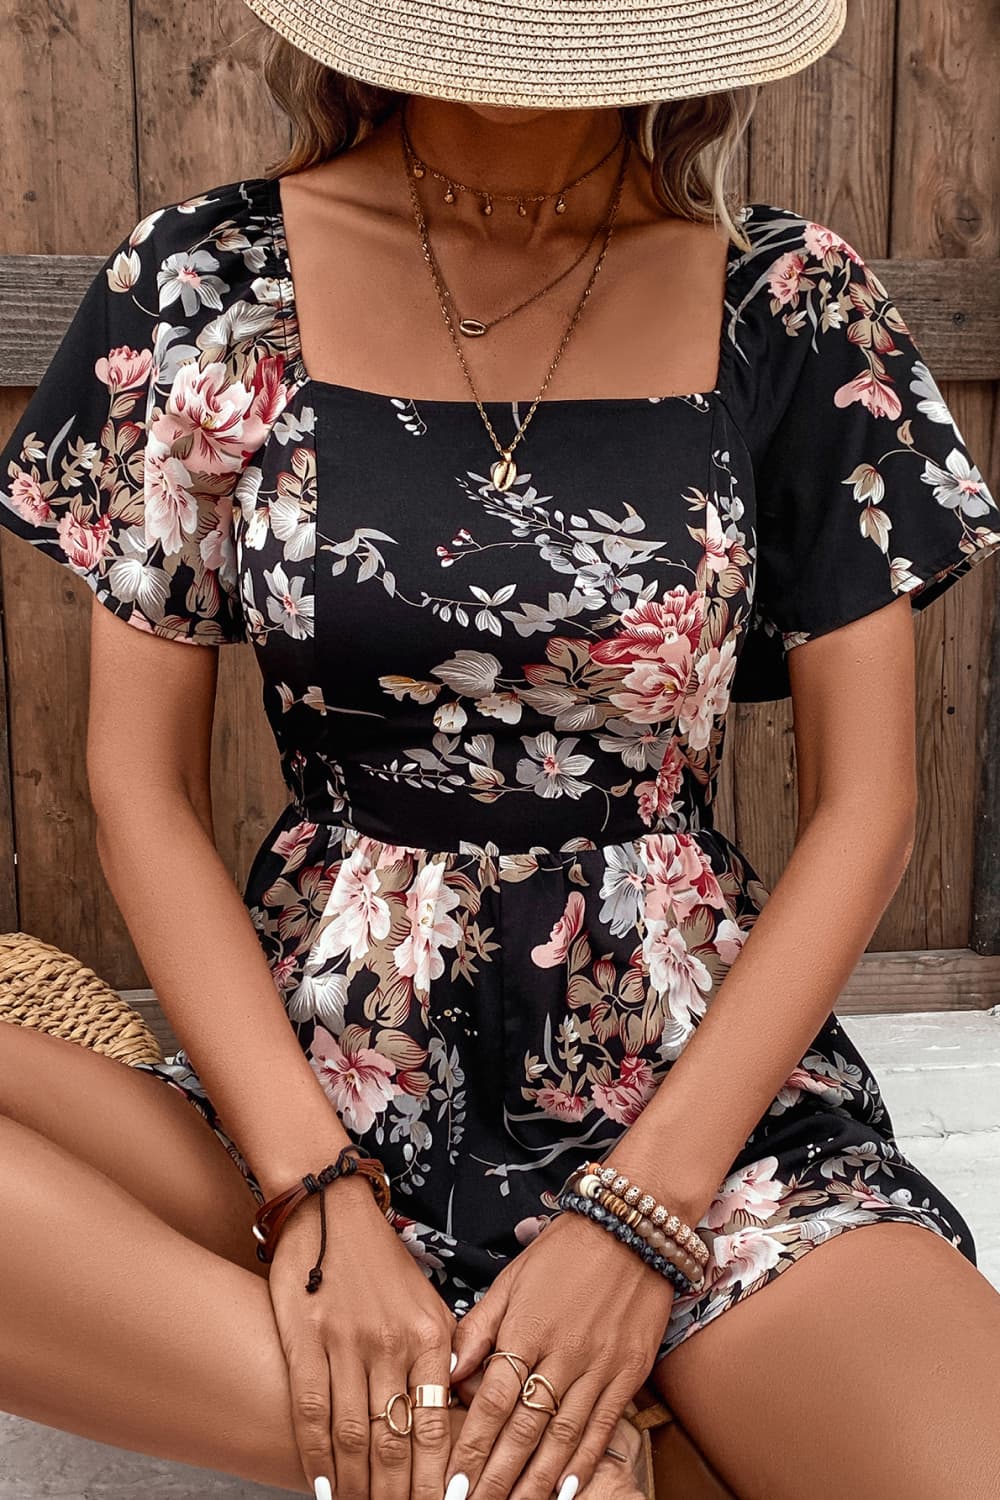 Floral Cutout Tie Back Romper - Cheeky Chic Boutique